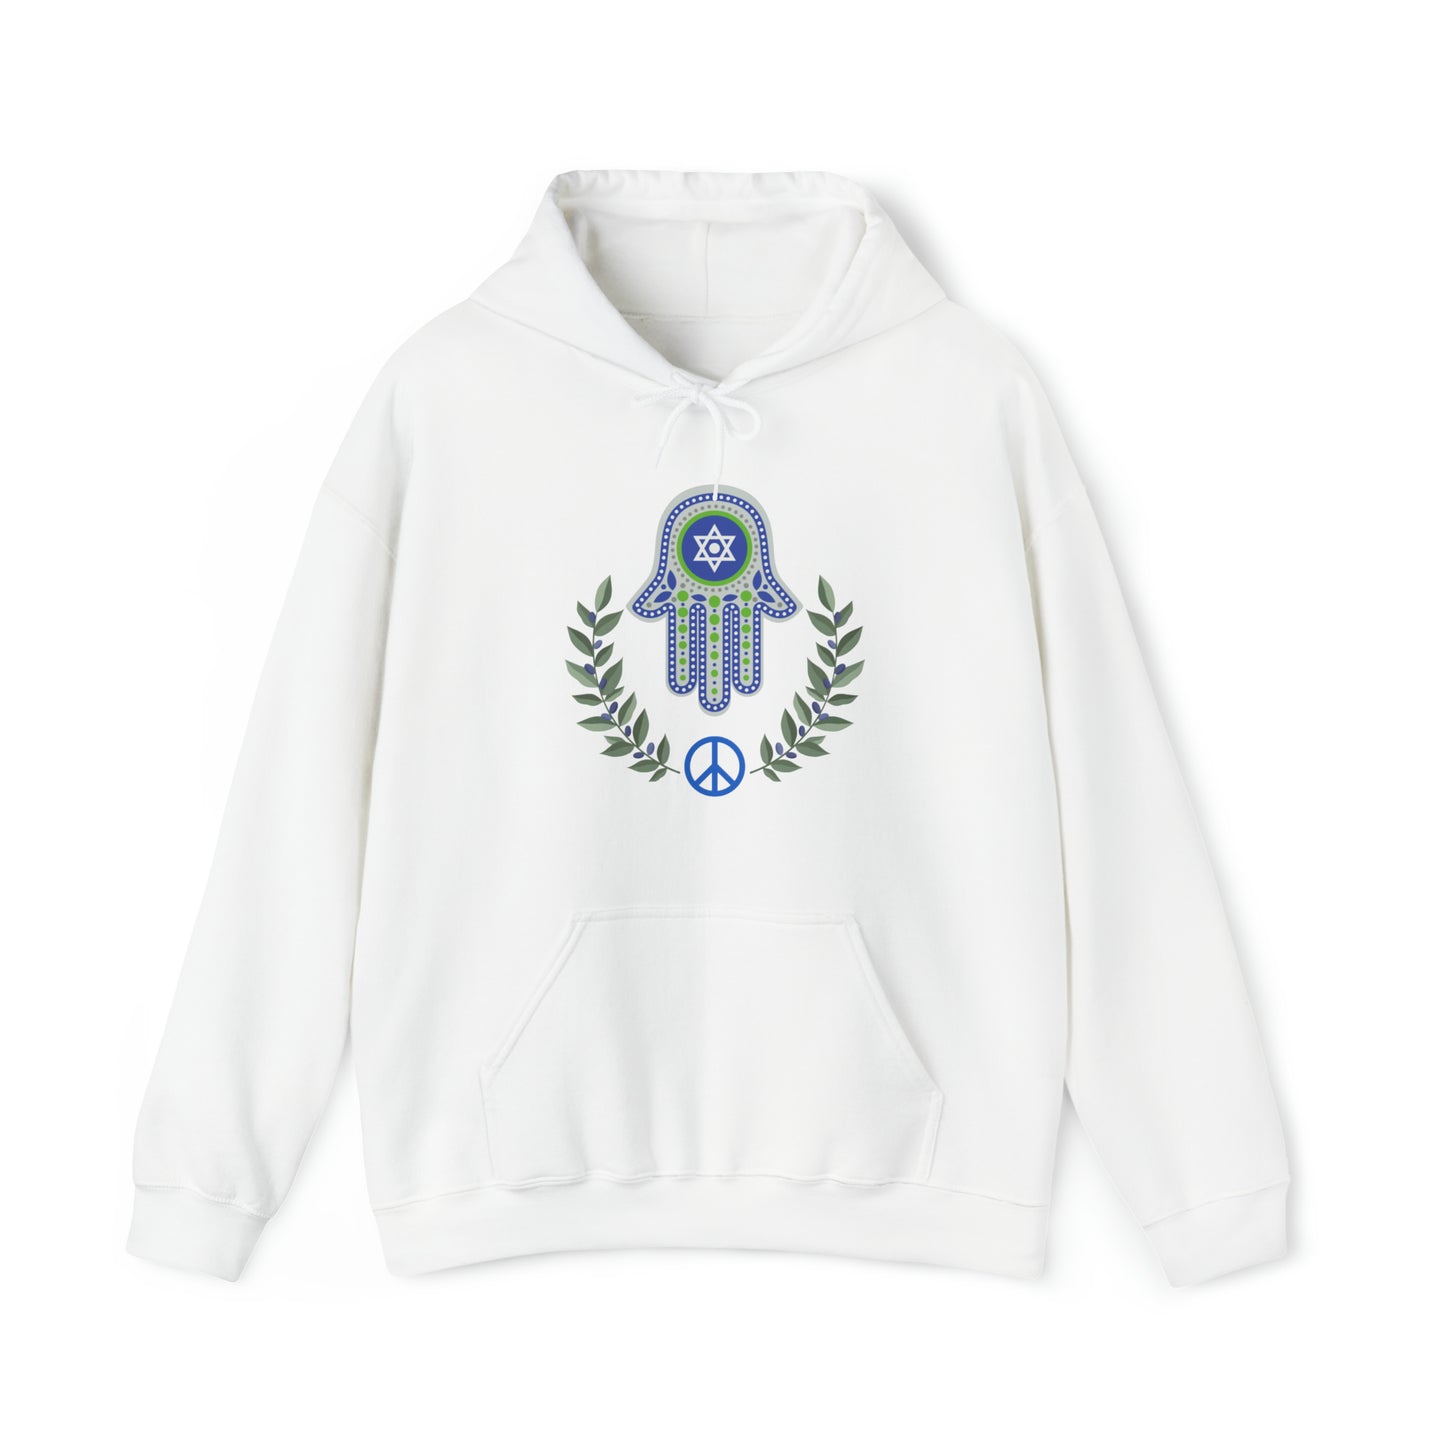 Stand for Peace Unisex Hooded Sweatshirt